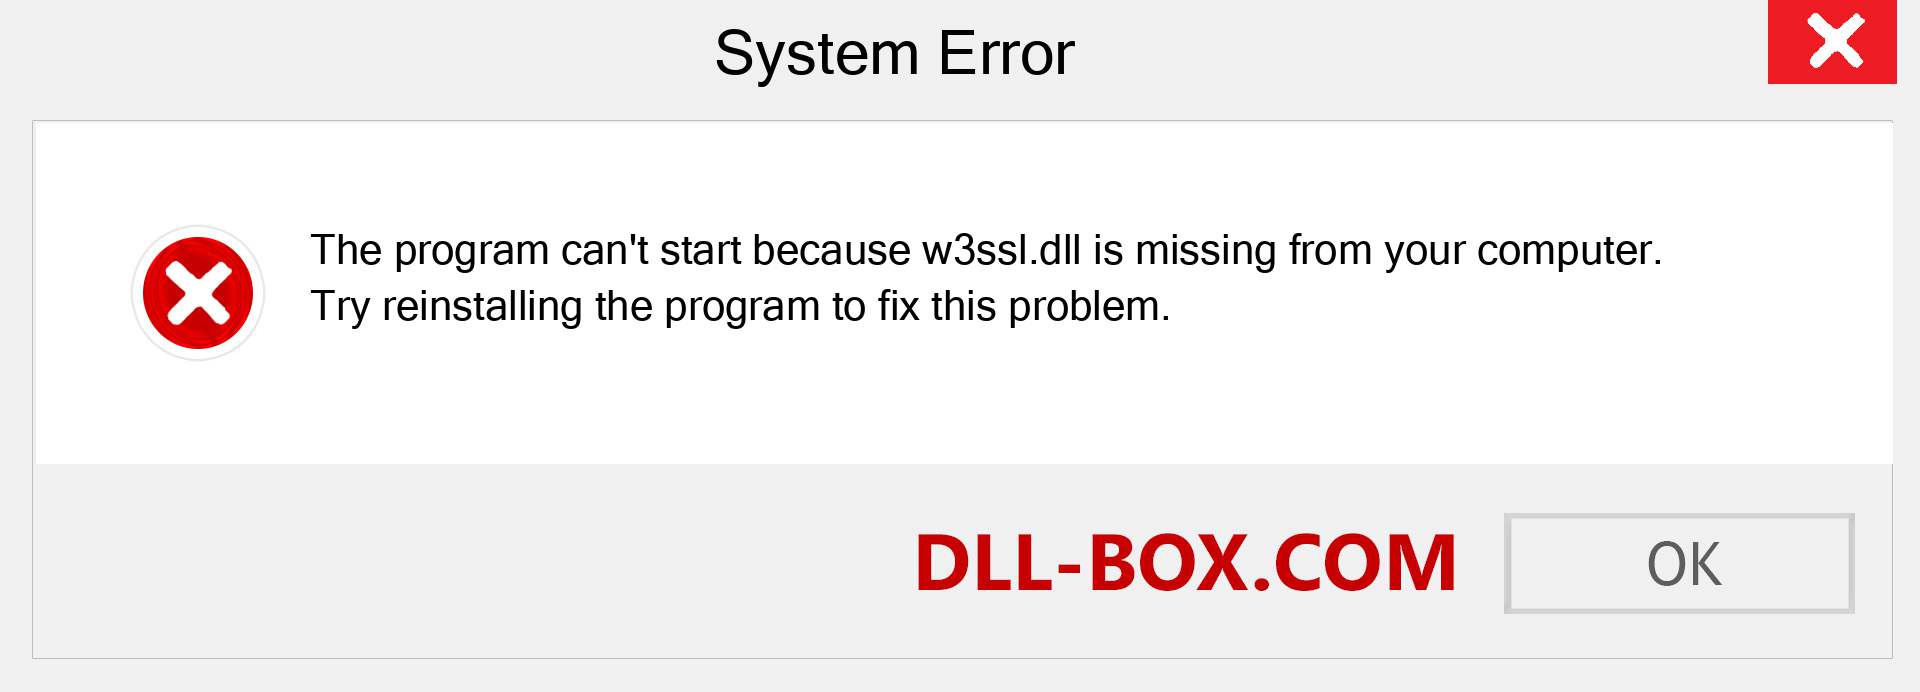  w3ssl.dll file is missing?. Download for Windows 7, 8, 10 - Fix  w3ssl dll Missing Error on Windows, photos, images